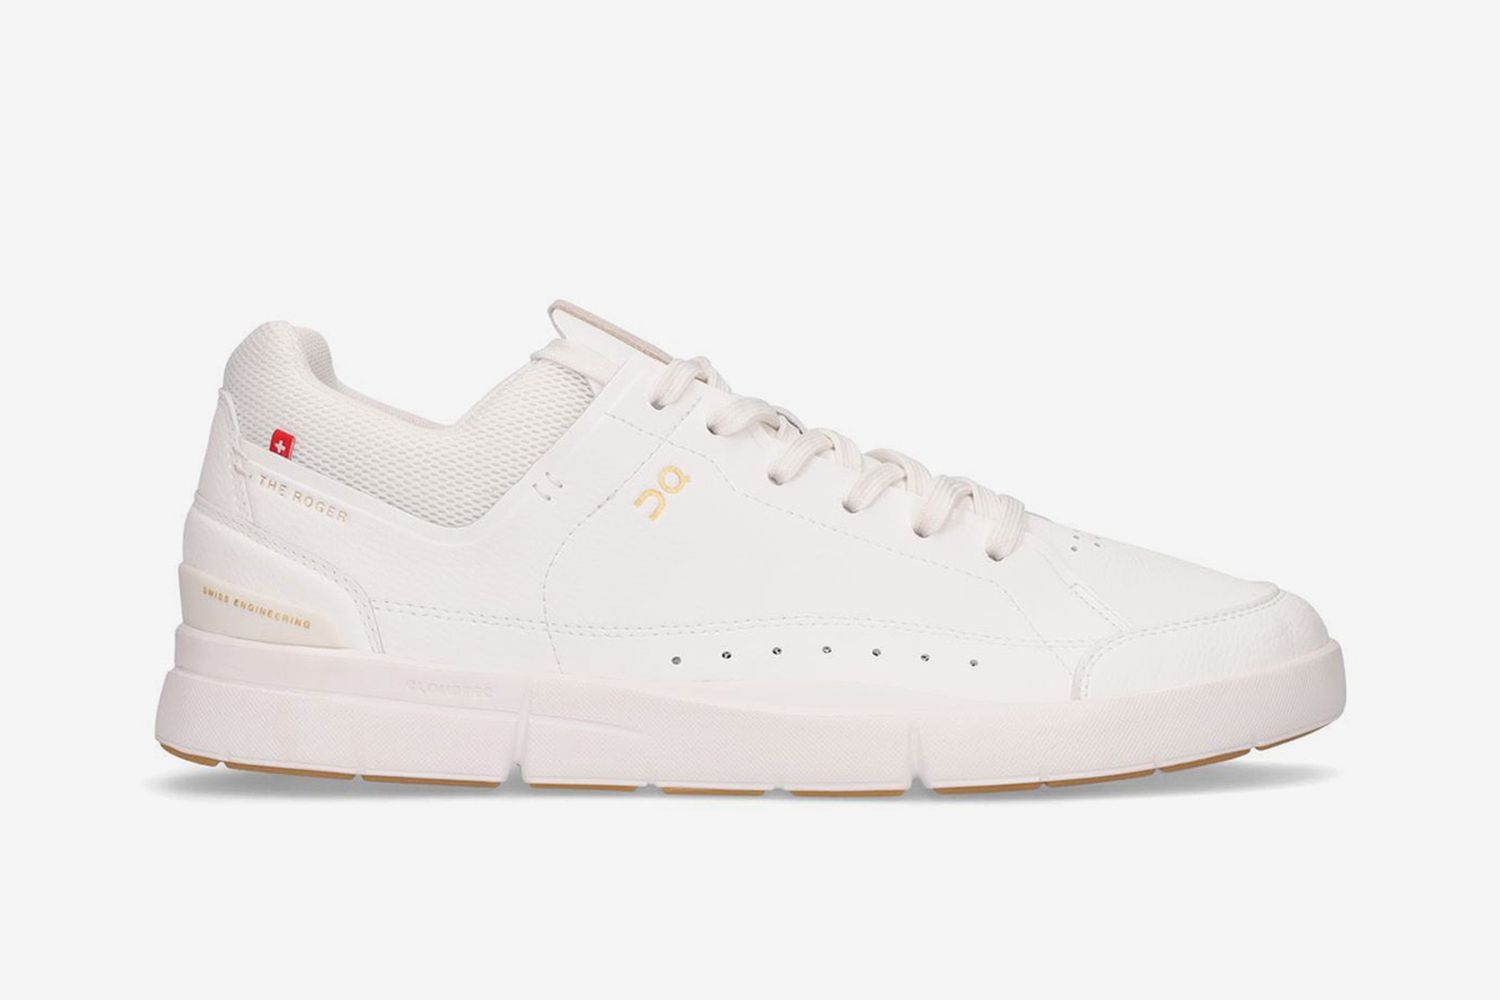 The Roger Center Court Sneakers